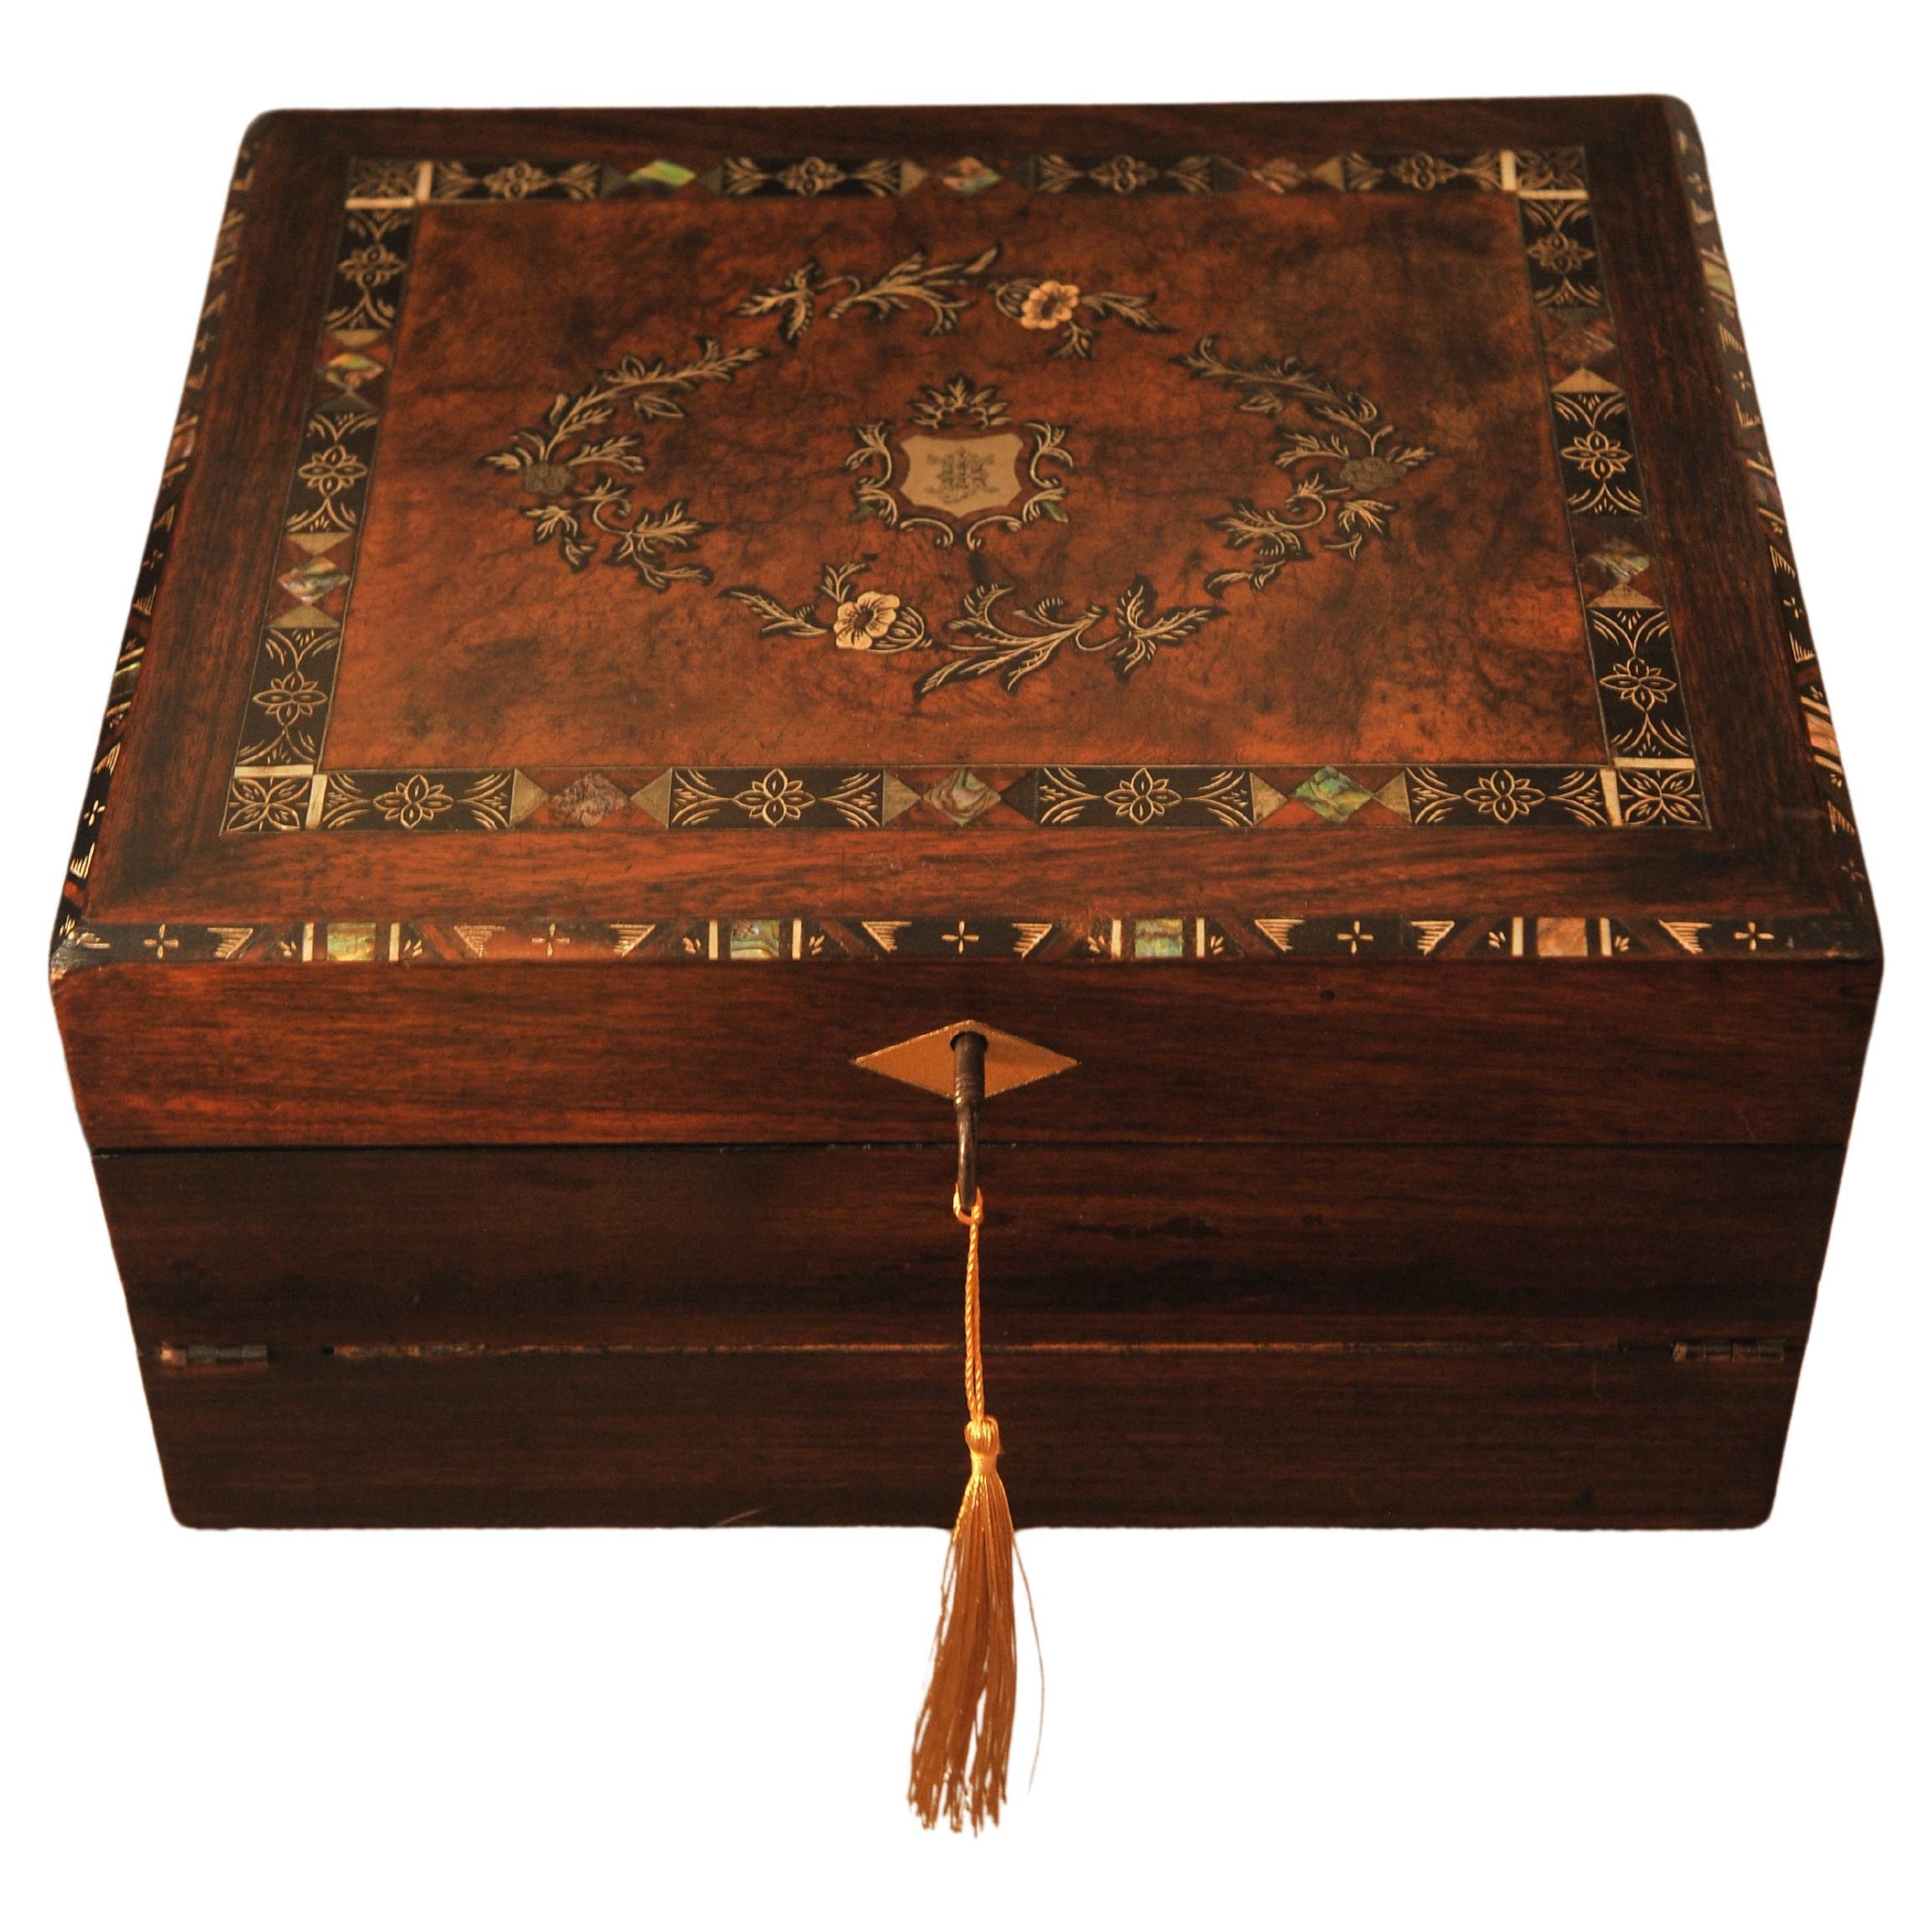 19th Century Victorian Rosewood Decorative Inlaid Writing Slope With An Engraved Shield. Stationary Compartments and Storage Space.

The item has black ebonised decorative accents & is fitted with a tooled black leather interior 

Supplied with two